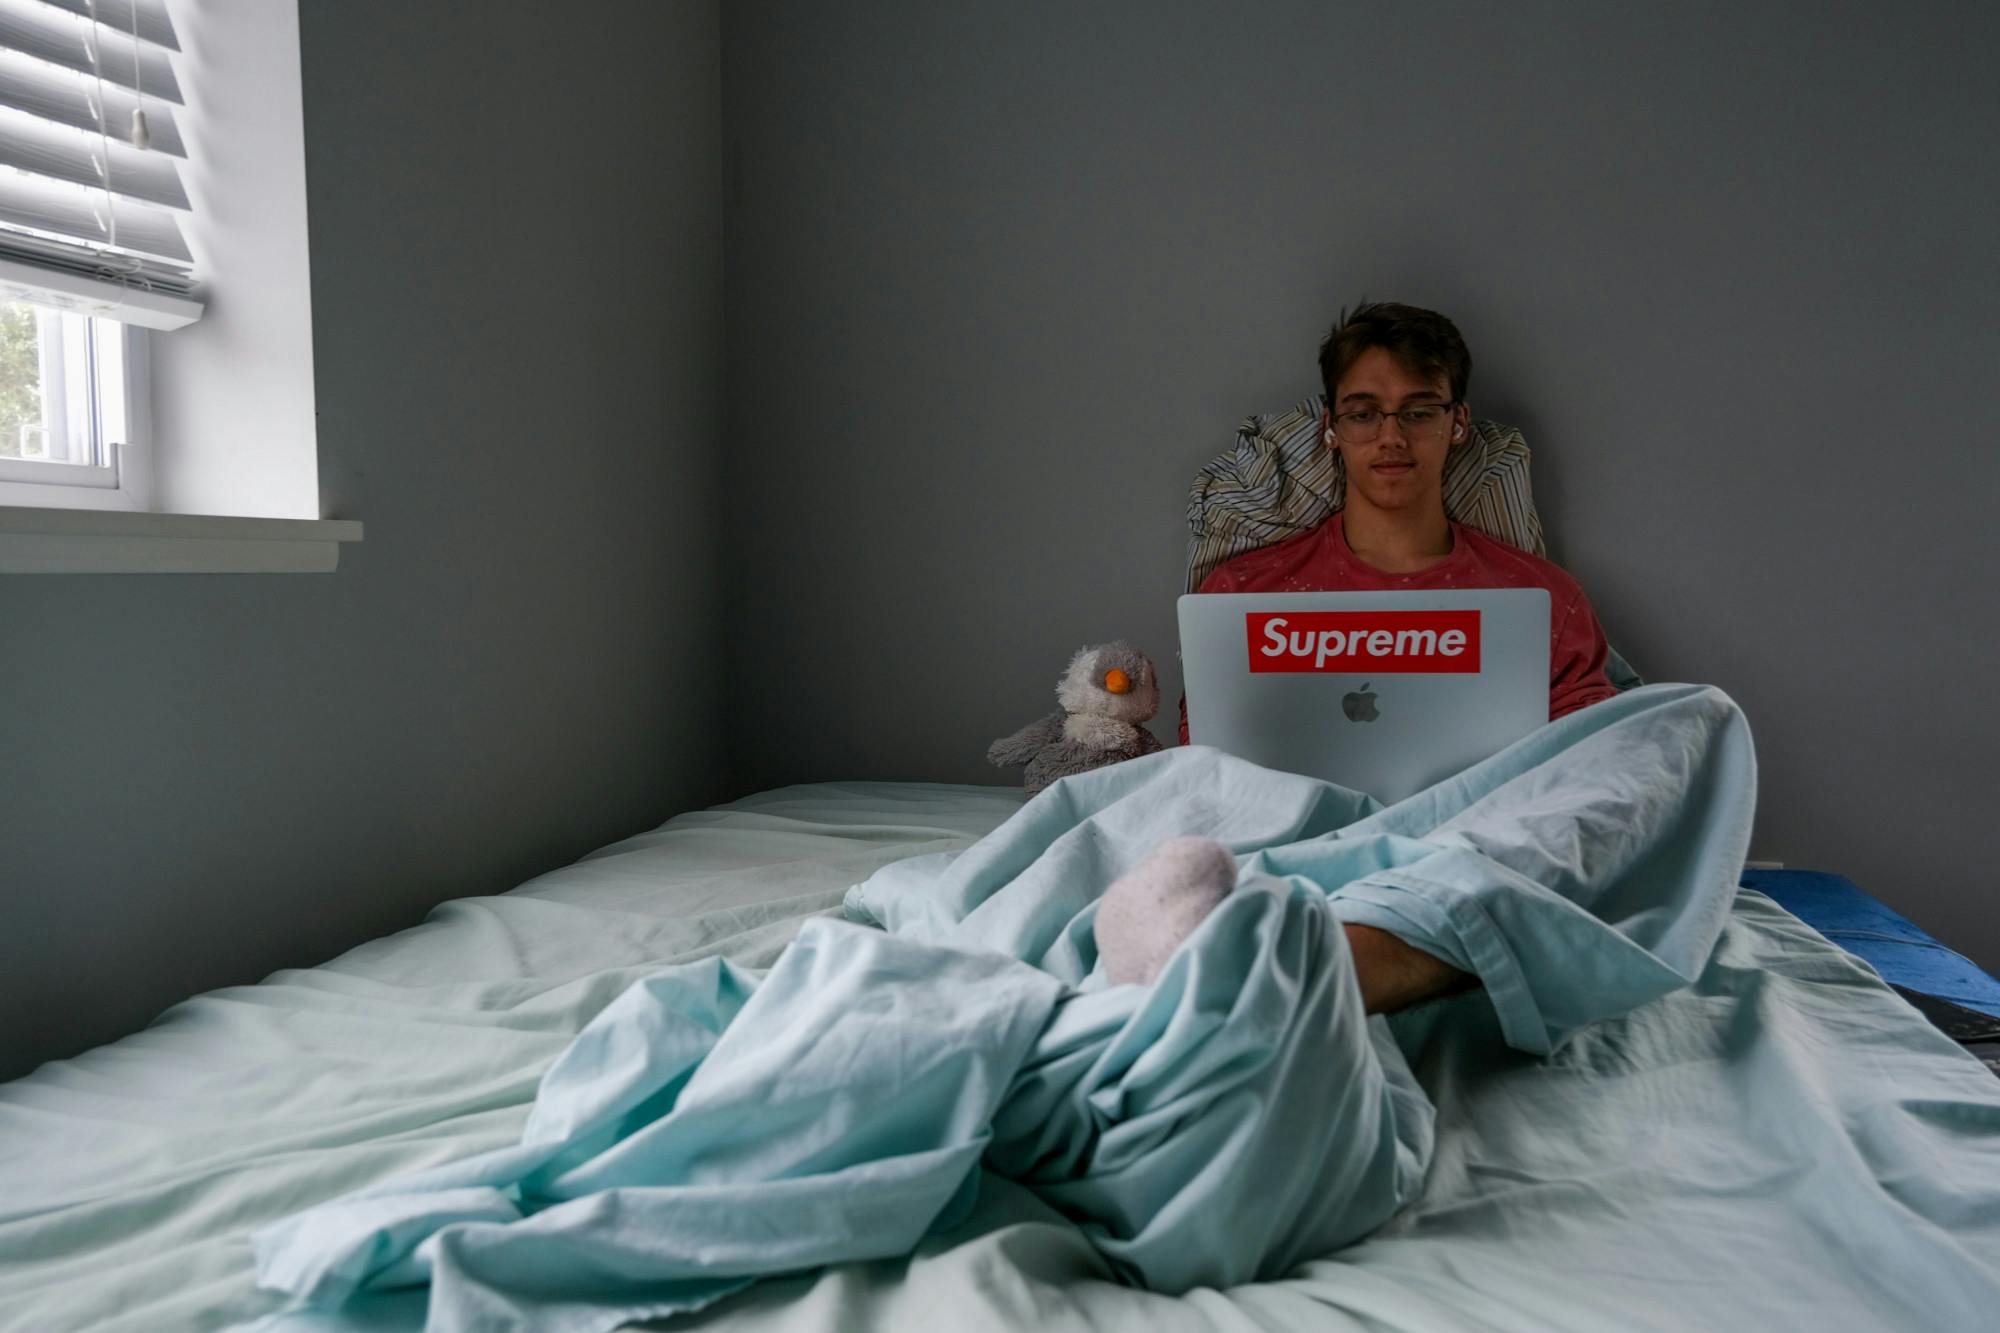 A person sits on a bed and works on a laptop with a Supreme sticker on it.